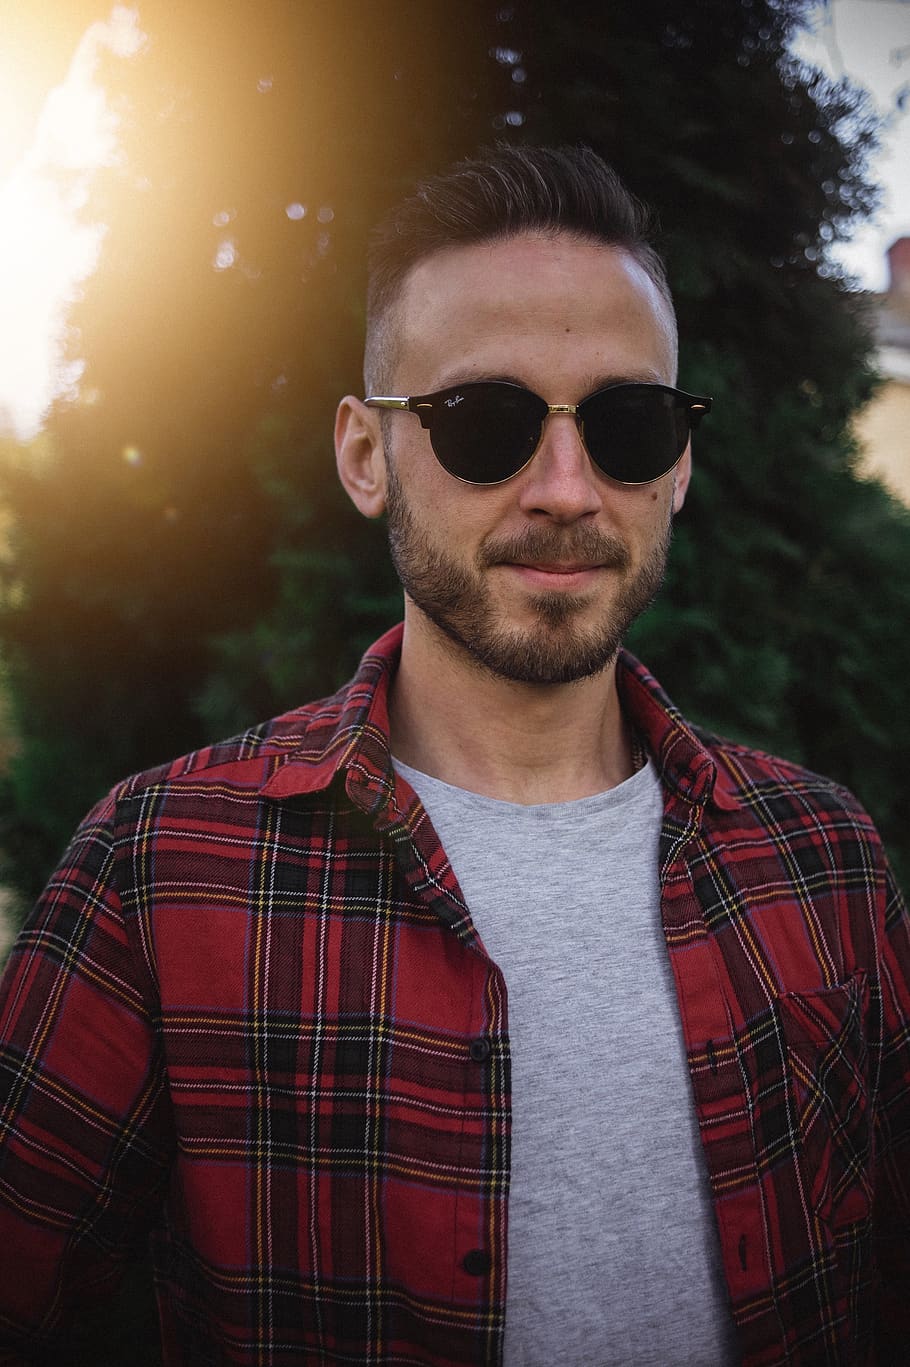 man wearing black sunglasses and plaid shirt, person, people